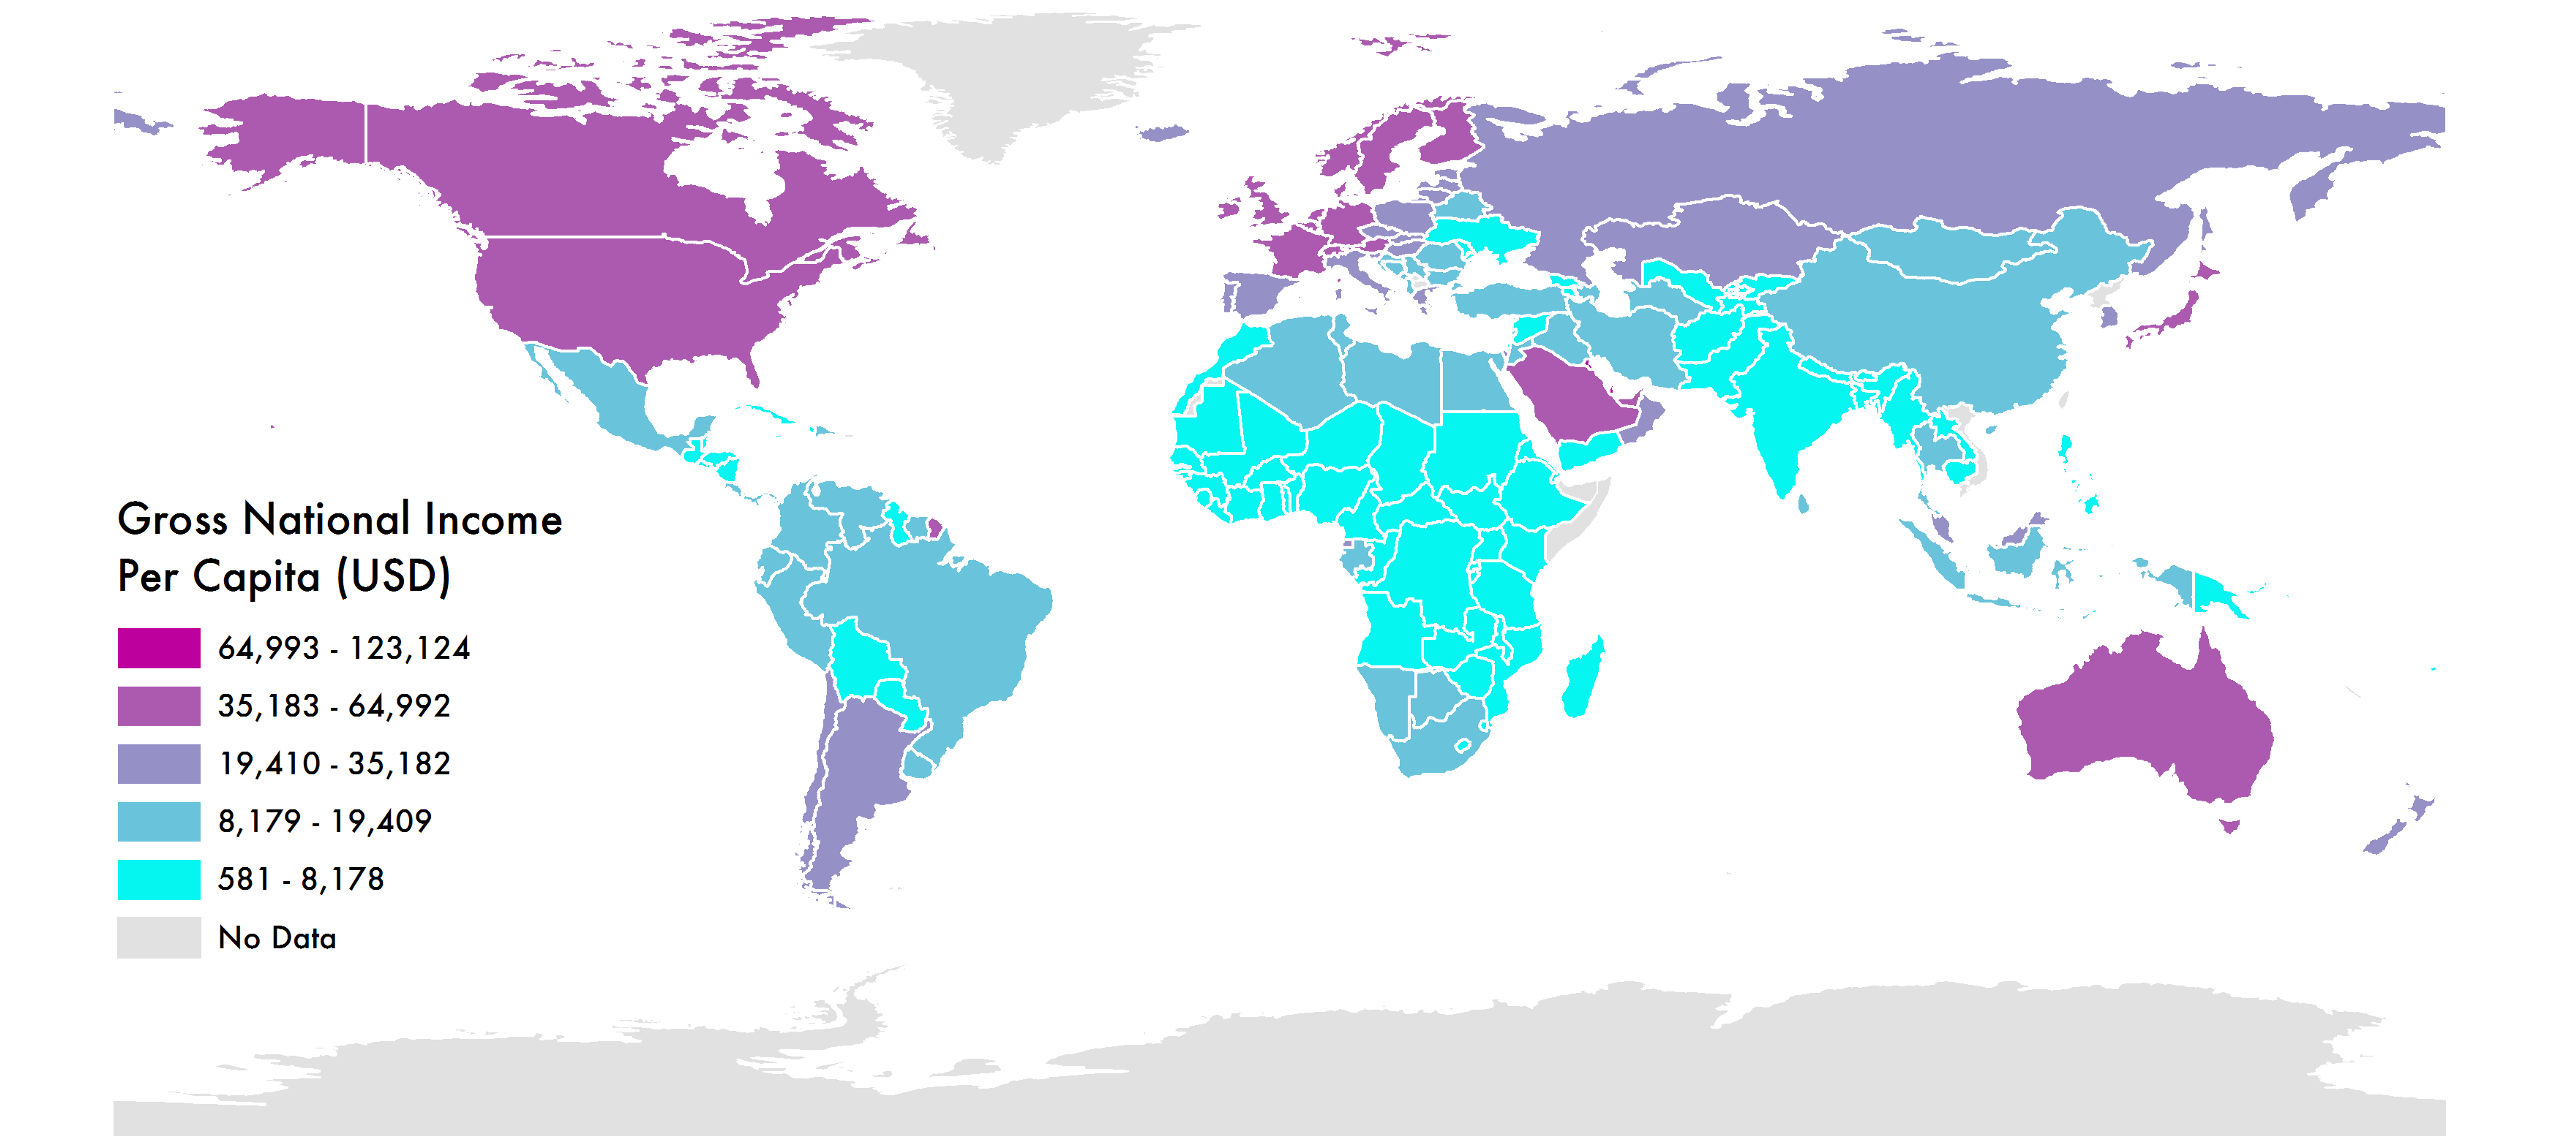 A world map color-coded for GNI per capita. The highest ratings are, unsurprisingly, North America, Europe, Japan, and Australia/NZ.